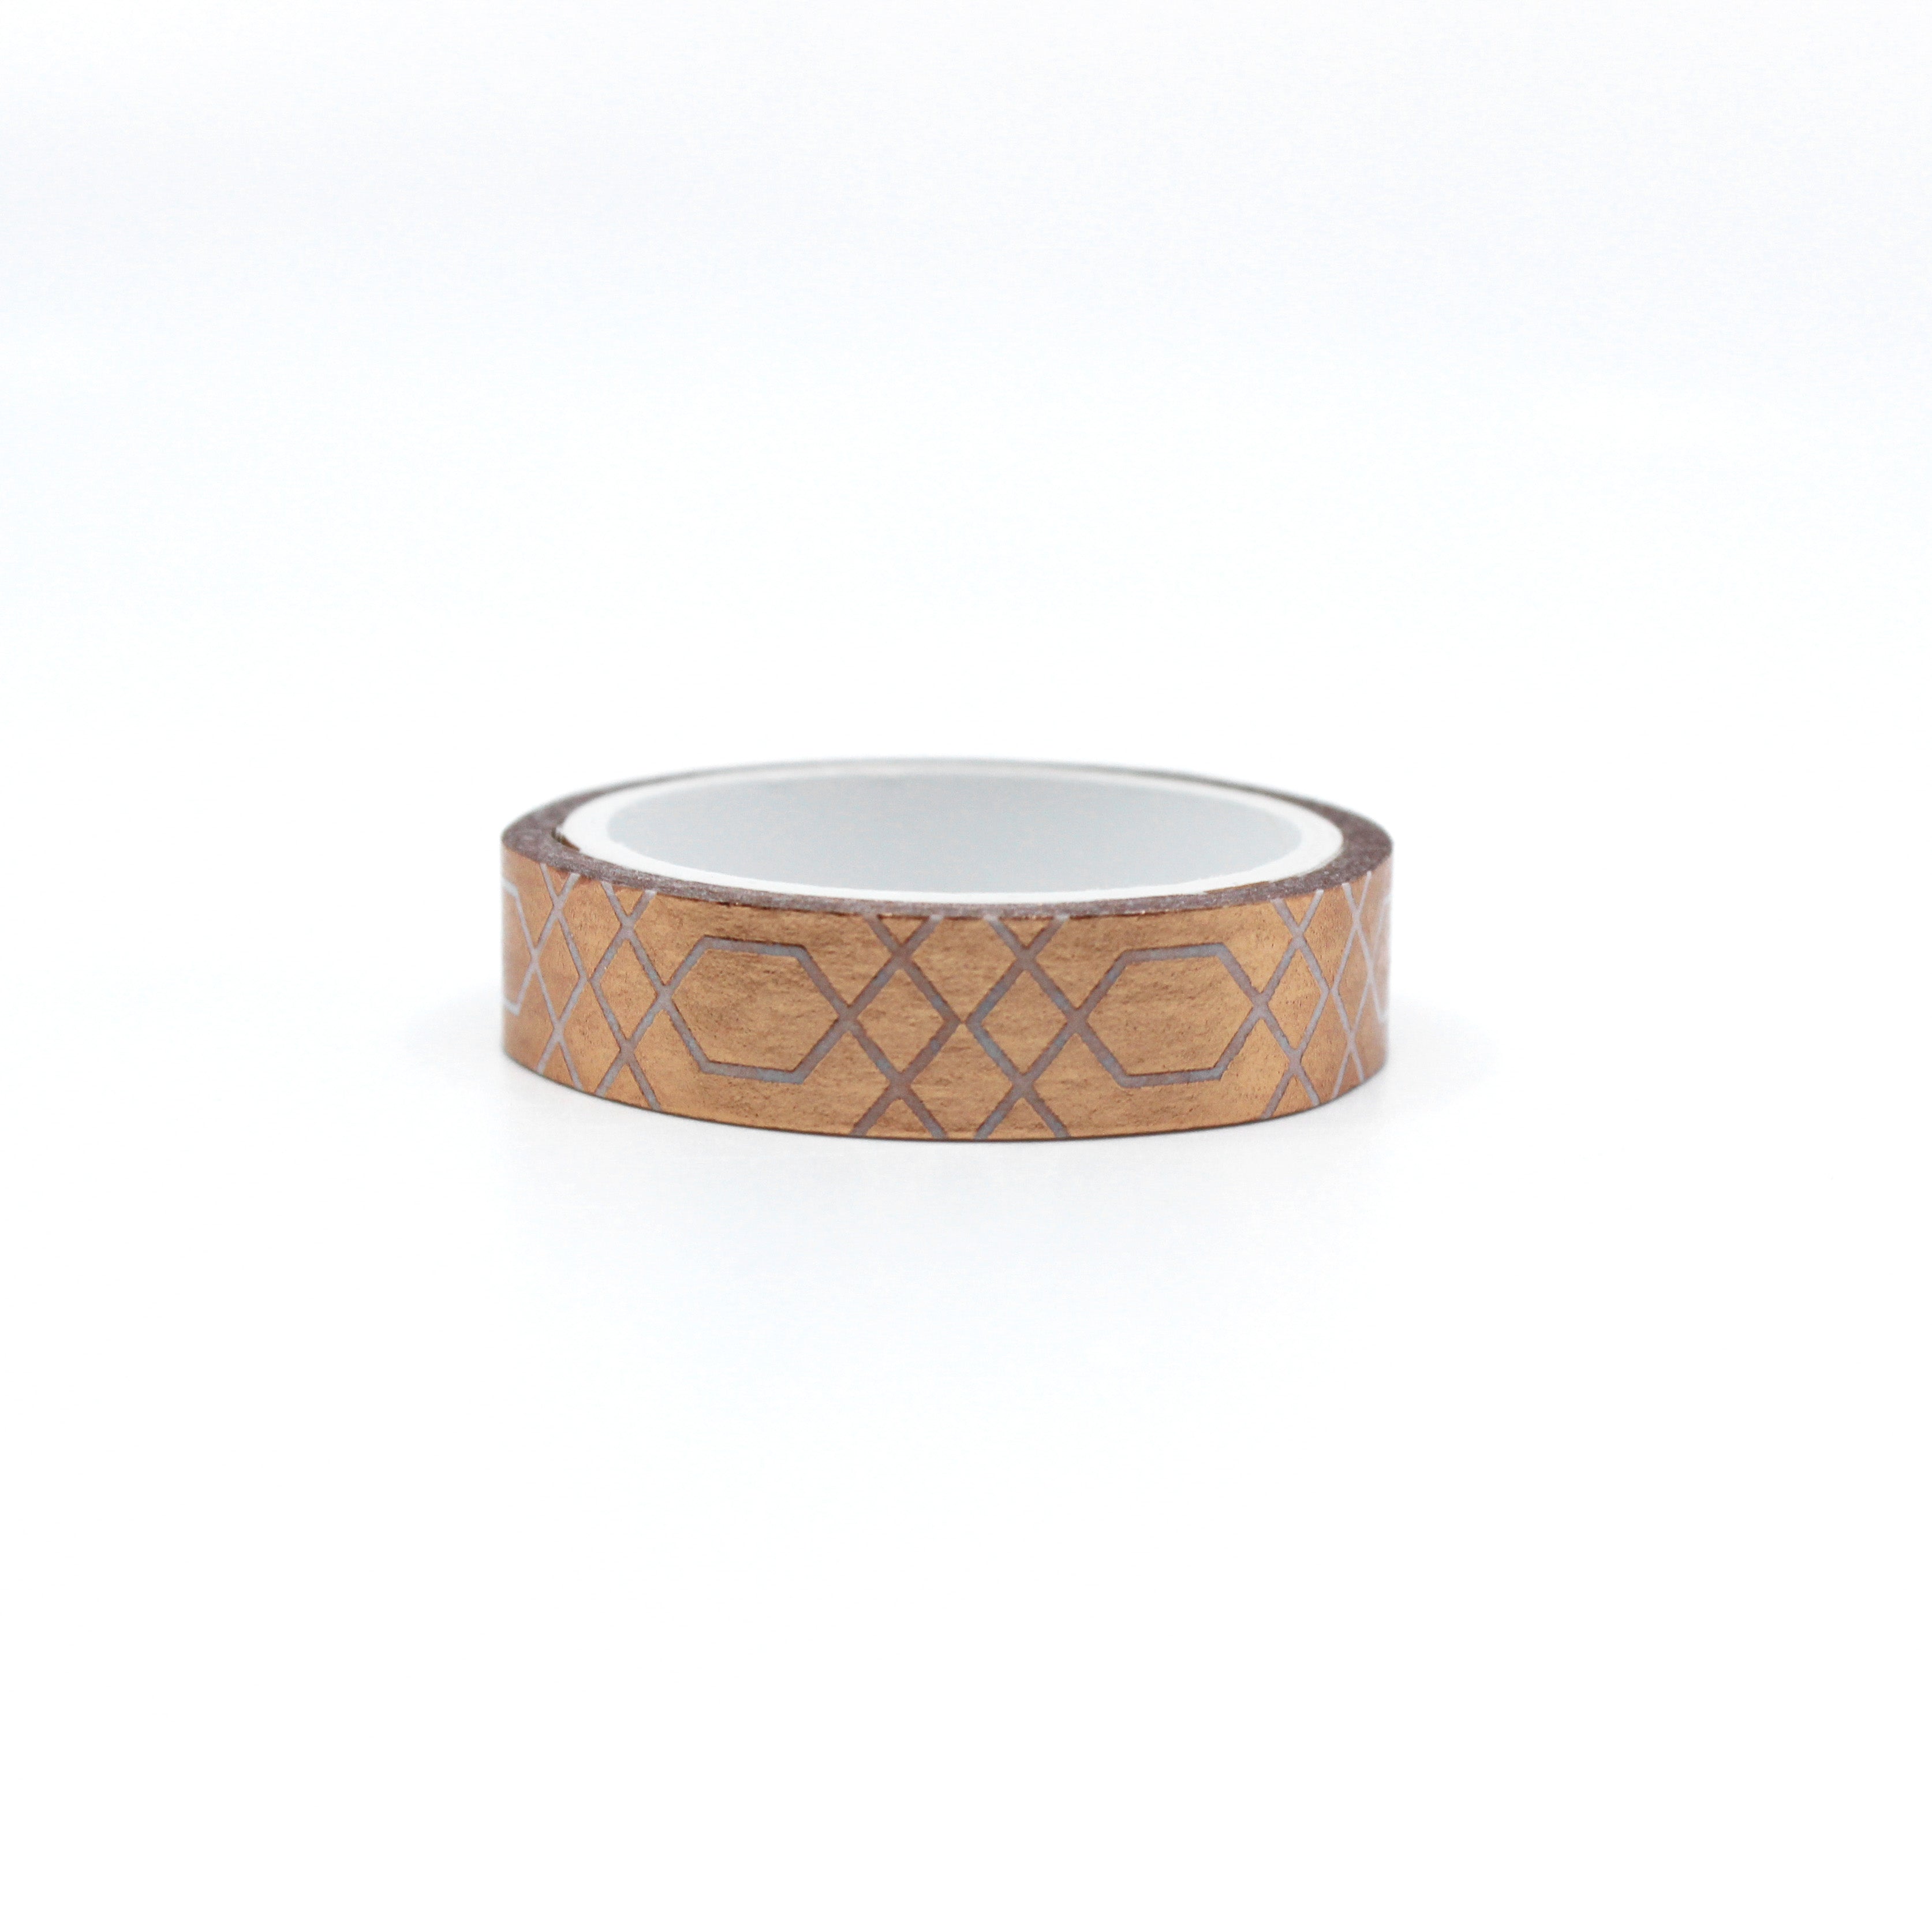 Elevate your crafts with this elegant copper foil washi tape featuring a decorative border scroll design. Perfect for adding a touch of sophistication to your scrapbooking, journaling, or card making projects. This tape is sold at BBB Supplies Craft Shop.